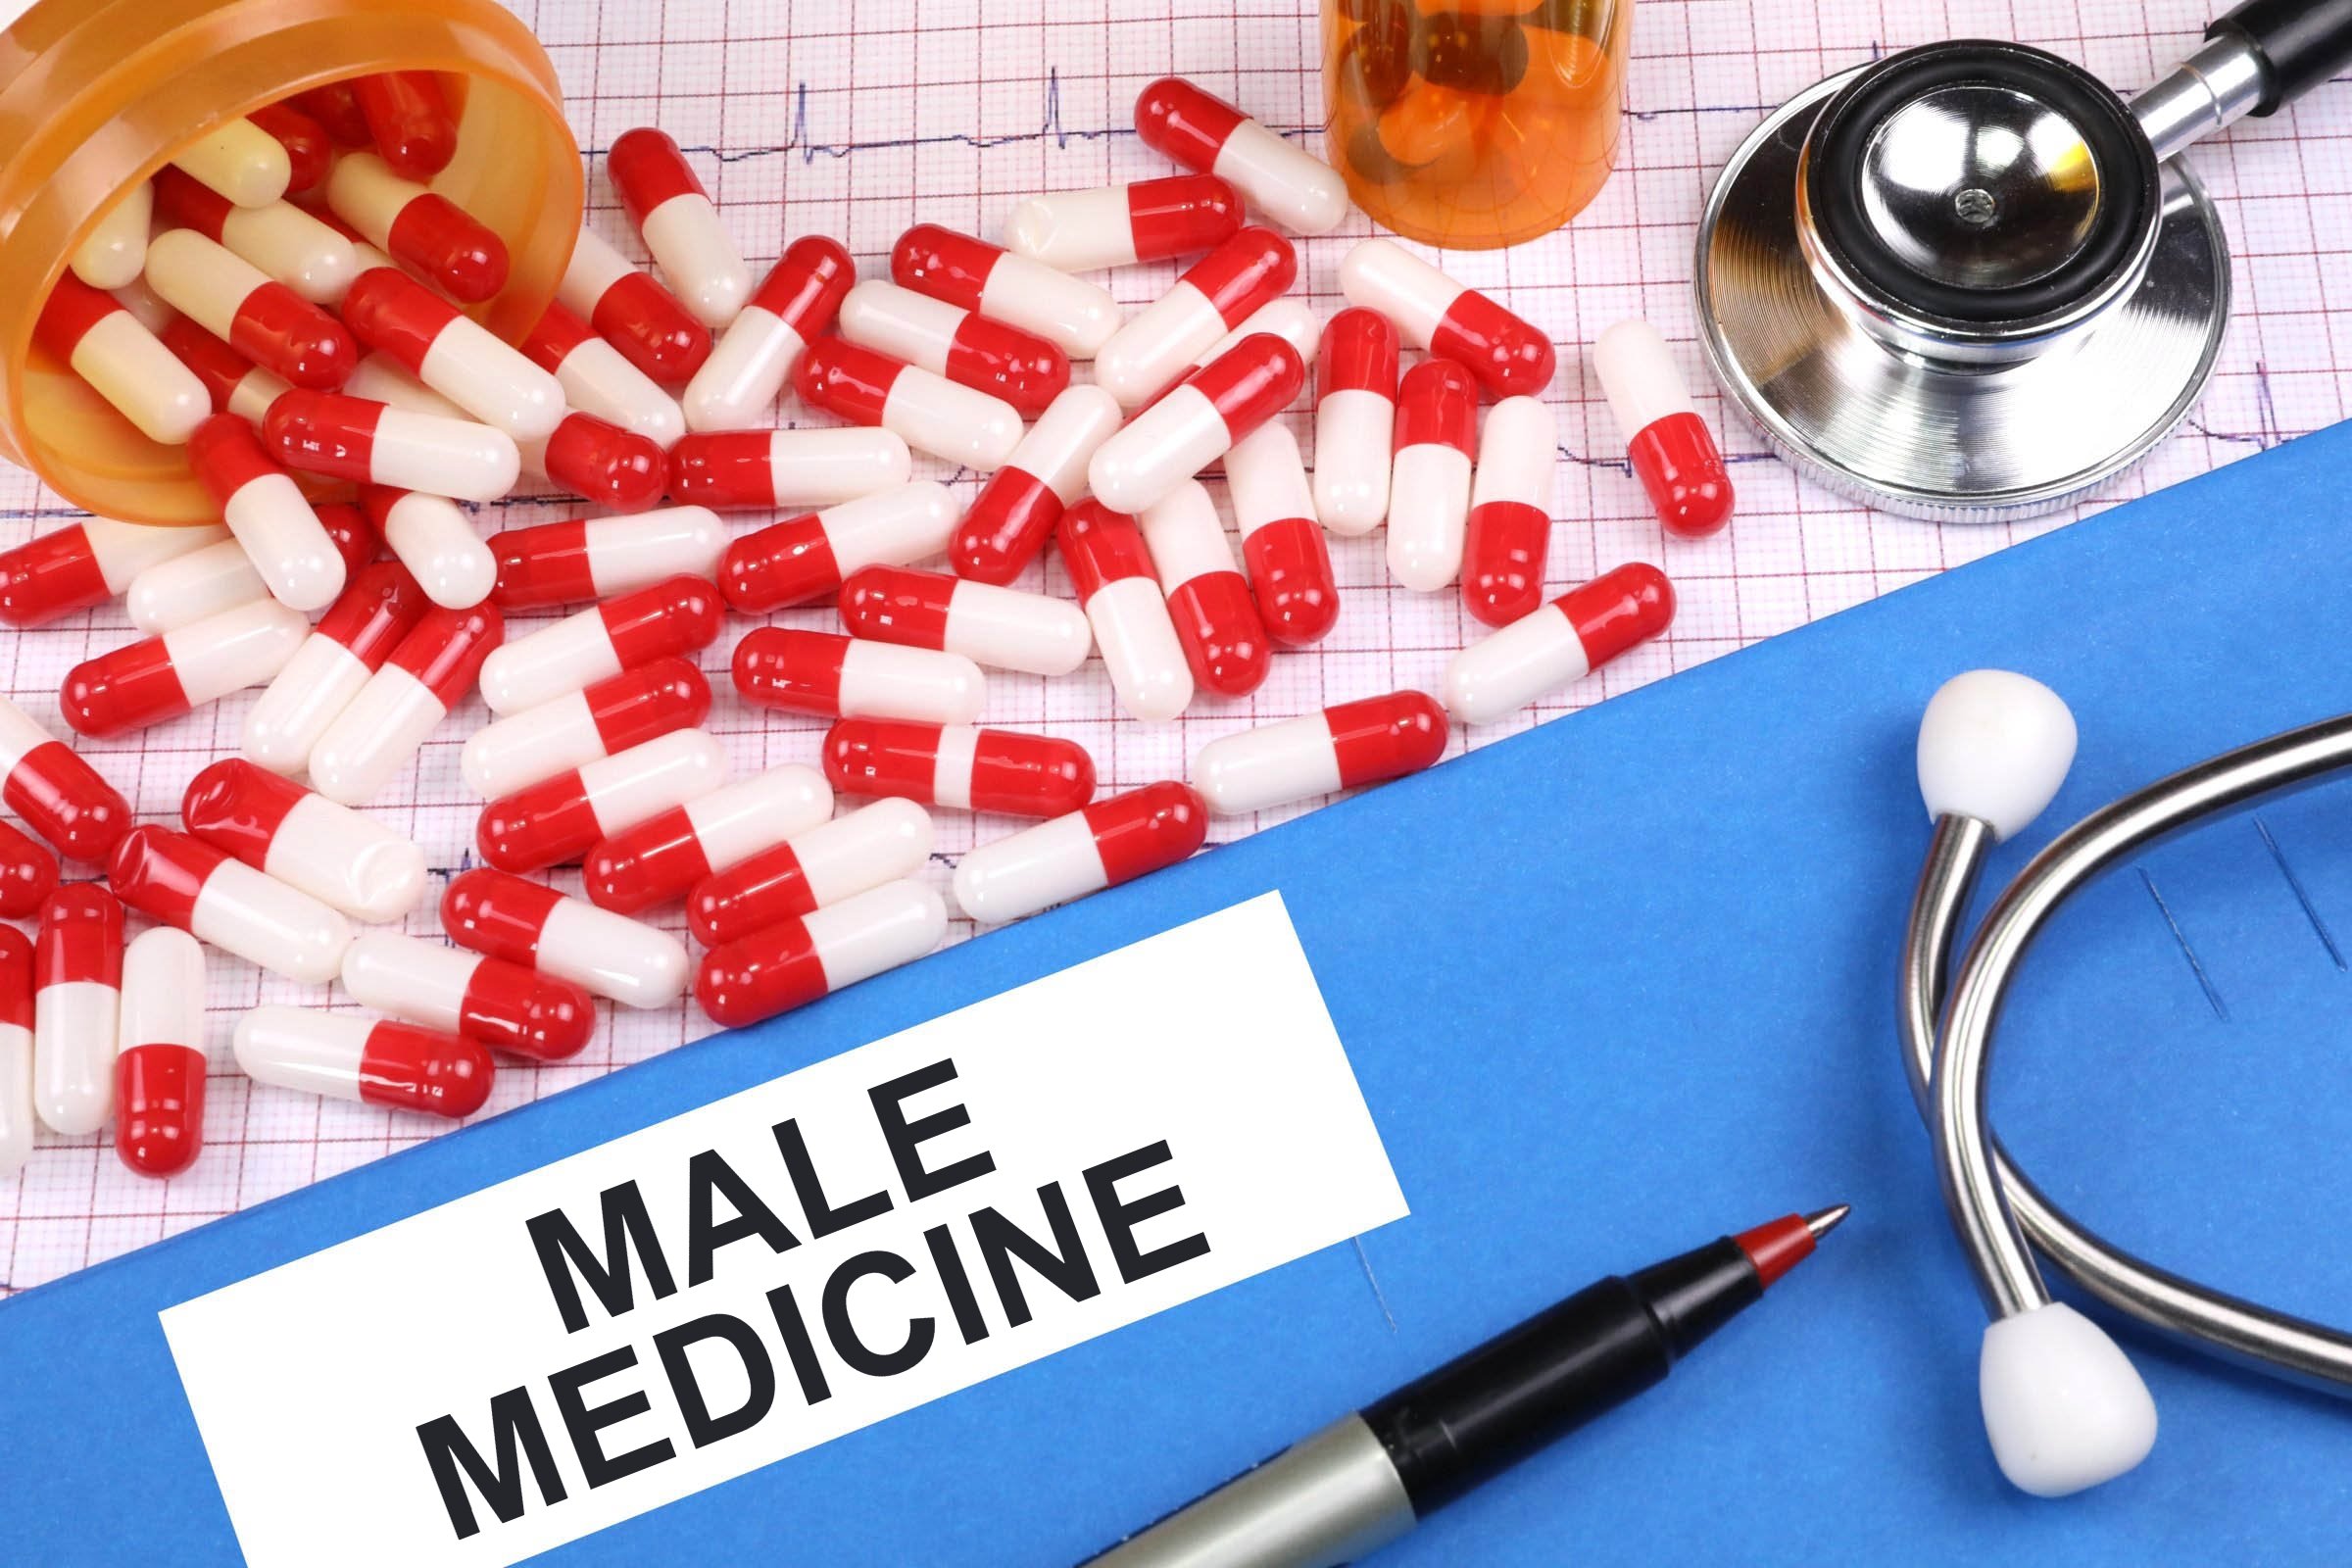 Free of Charge Creative Commons male medicine Image - Medical 5